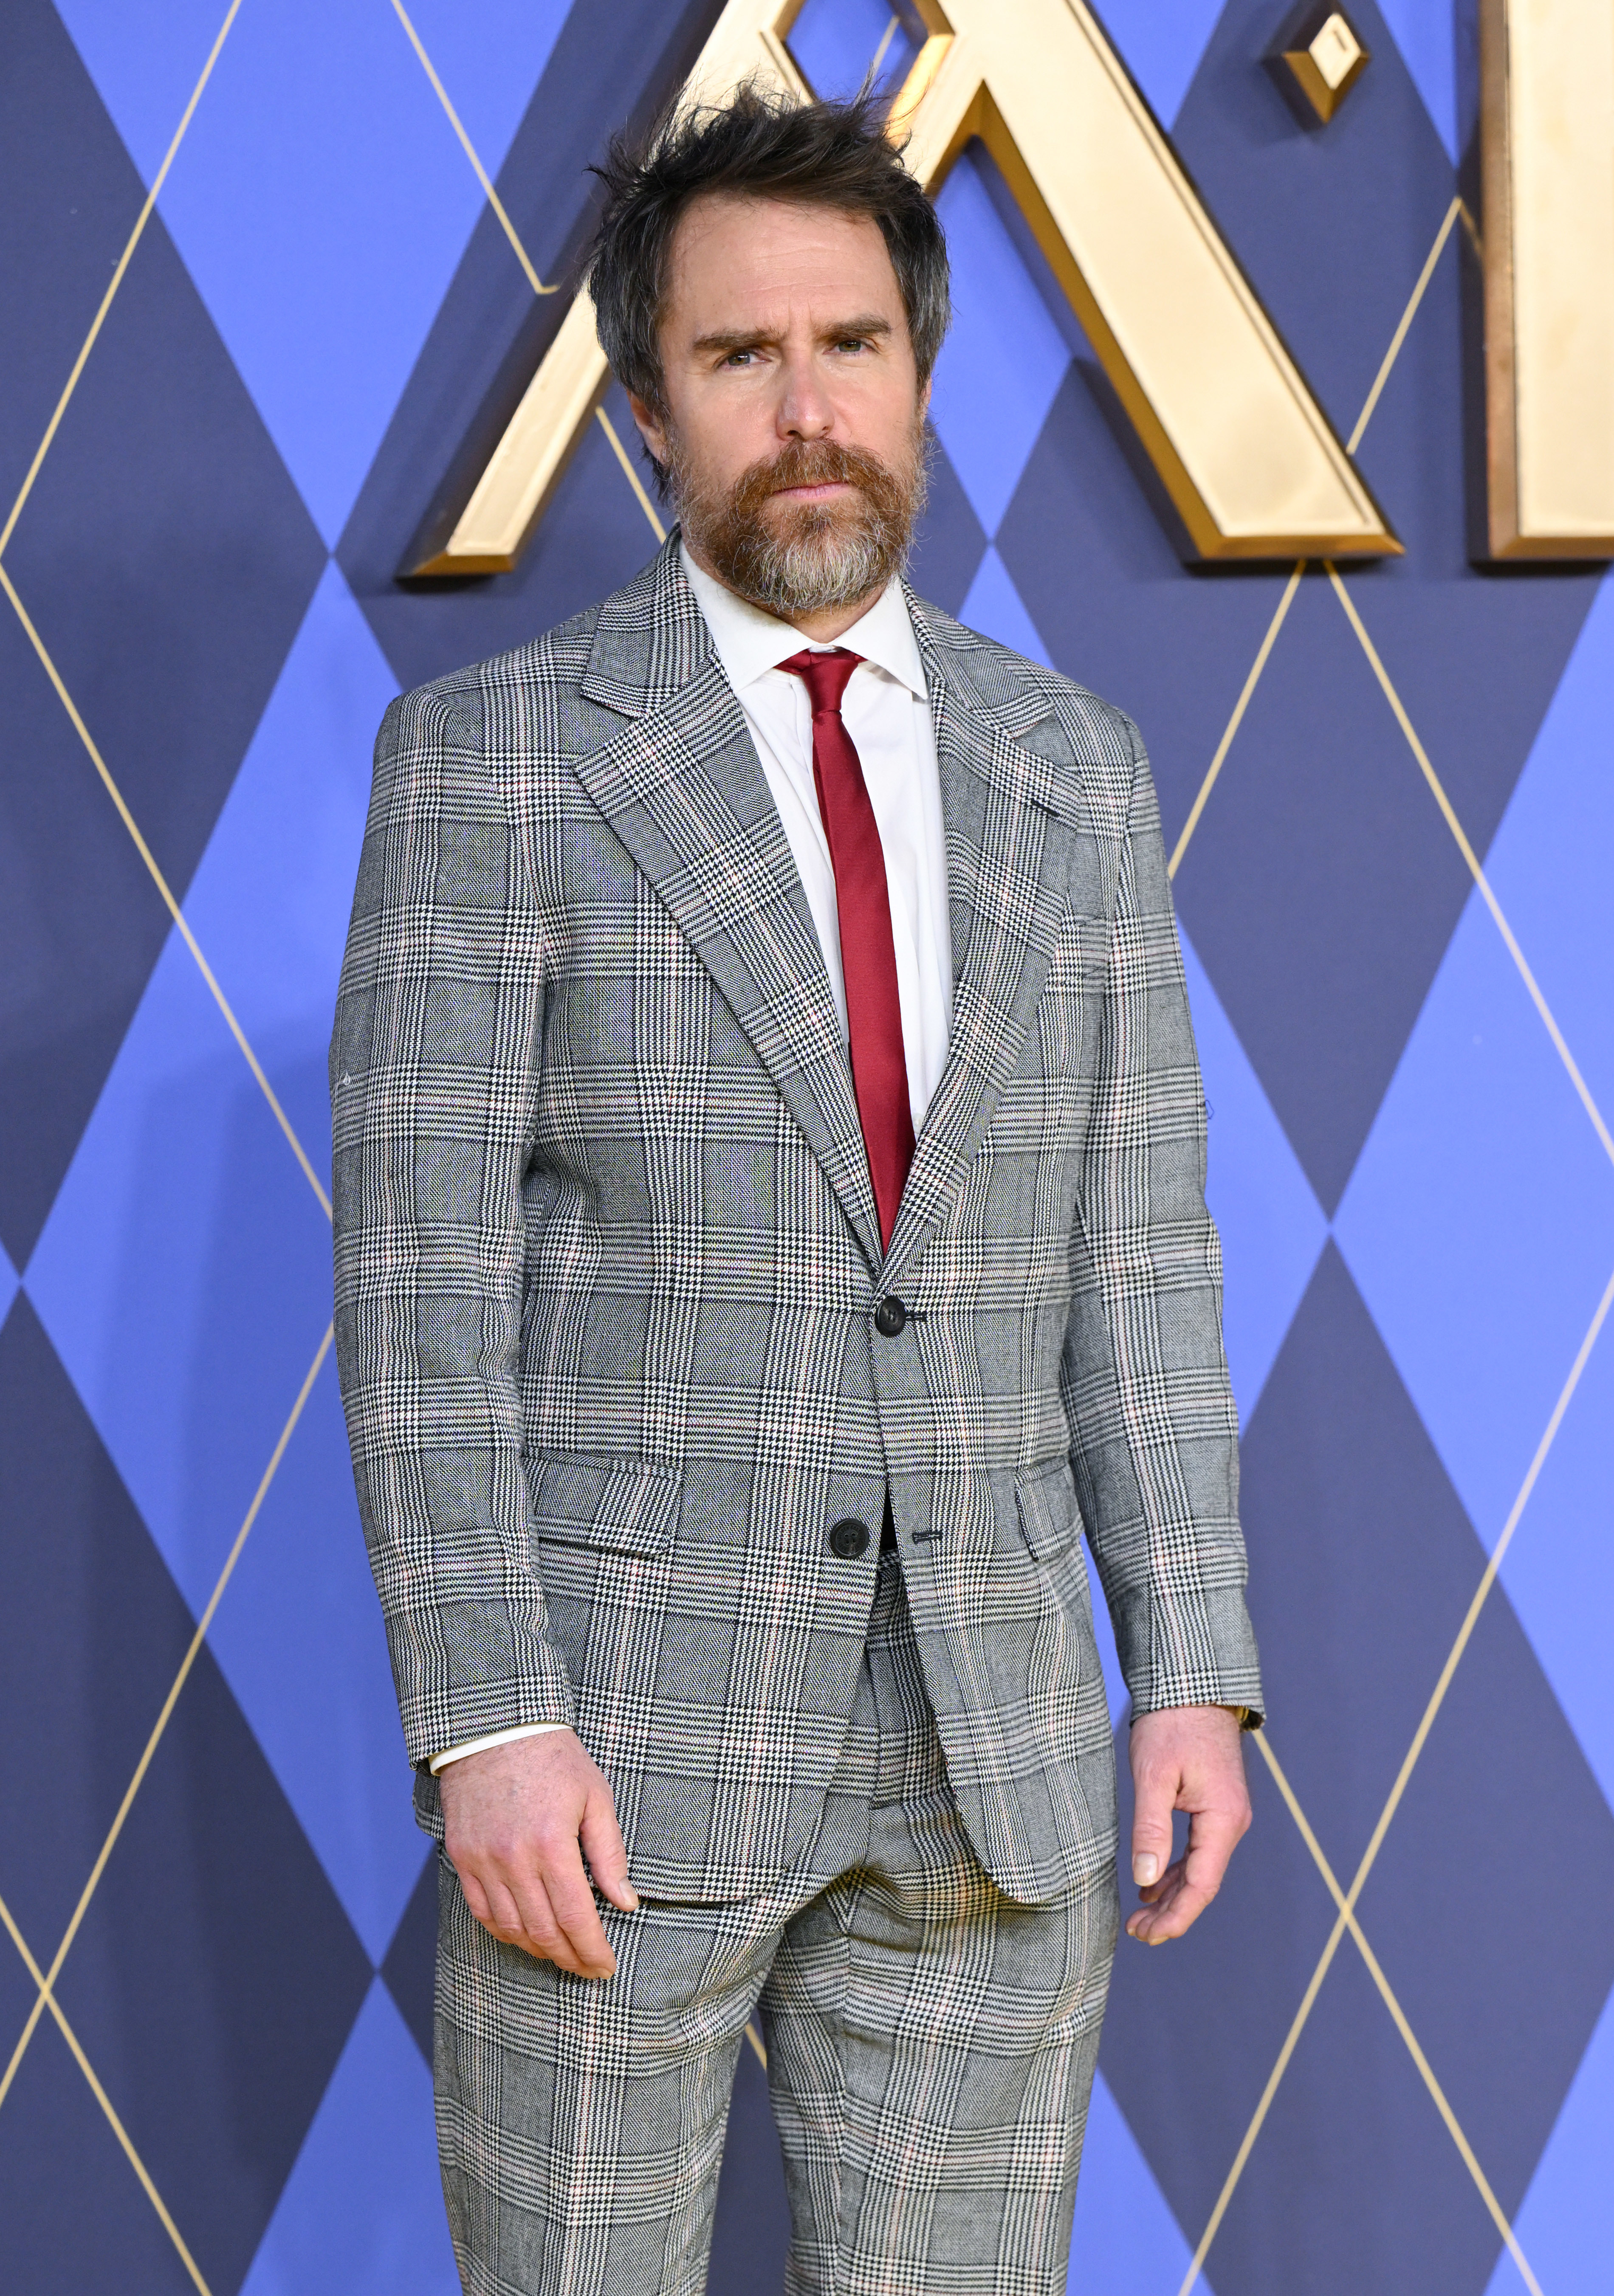 Sam Rockwell stands on the carpet in a plaid suit with a tie